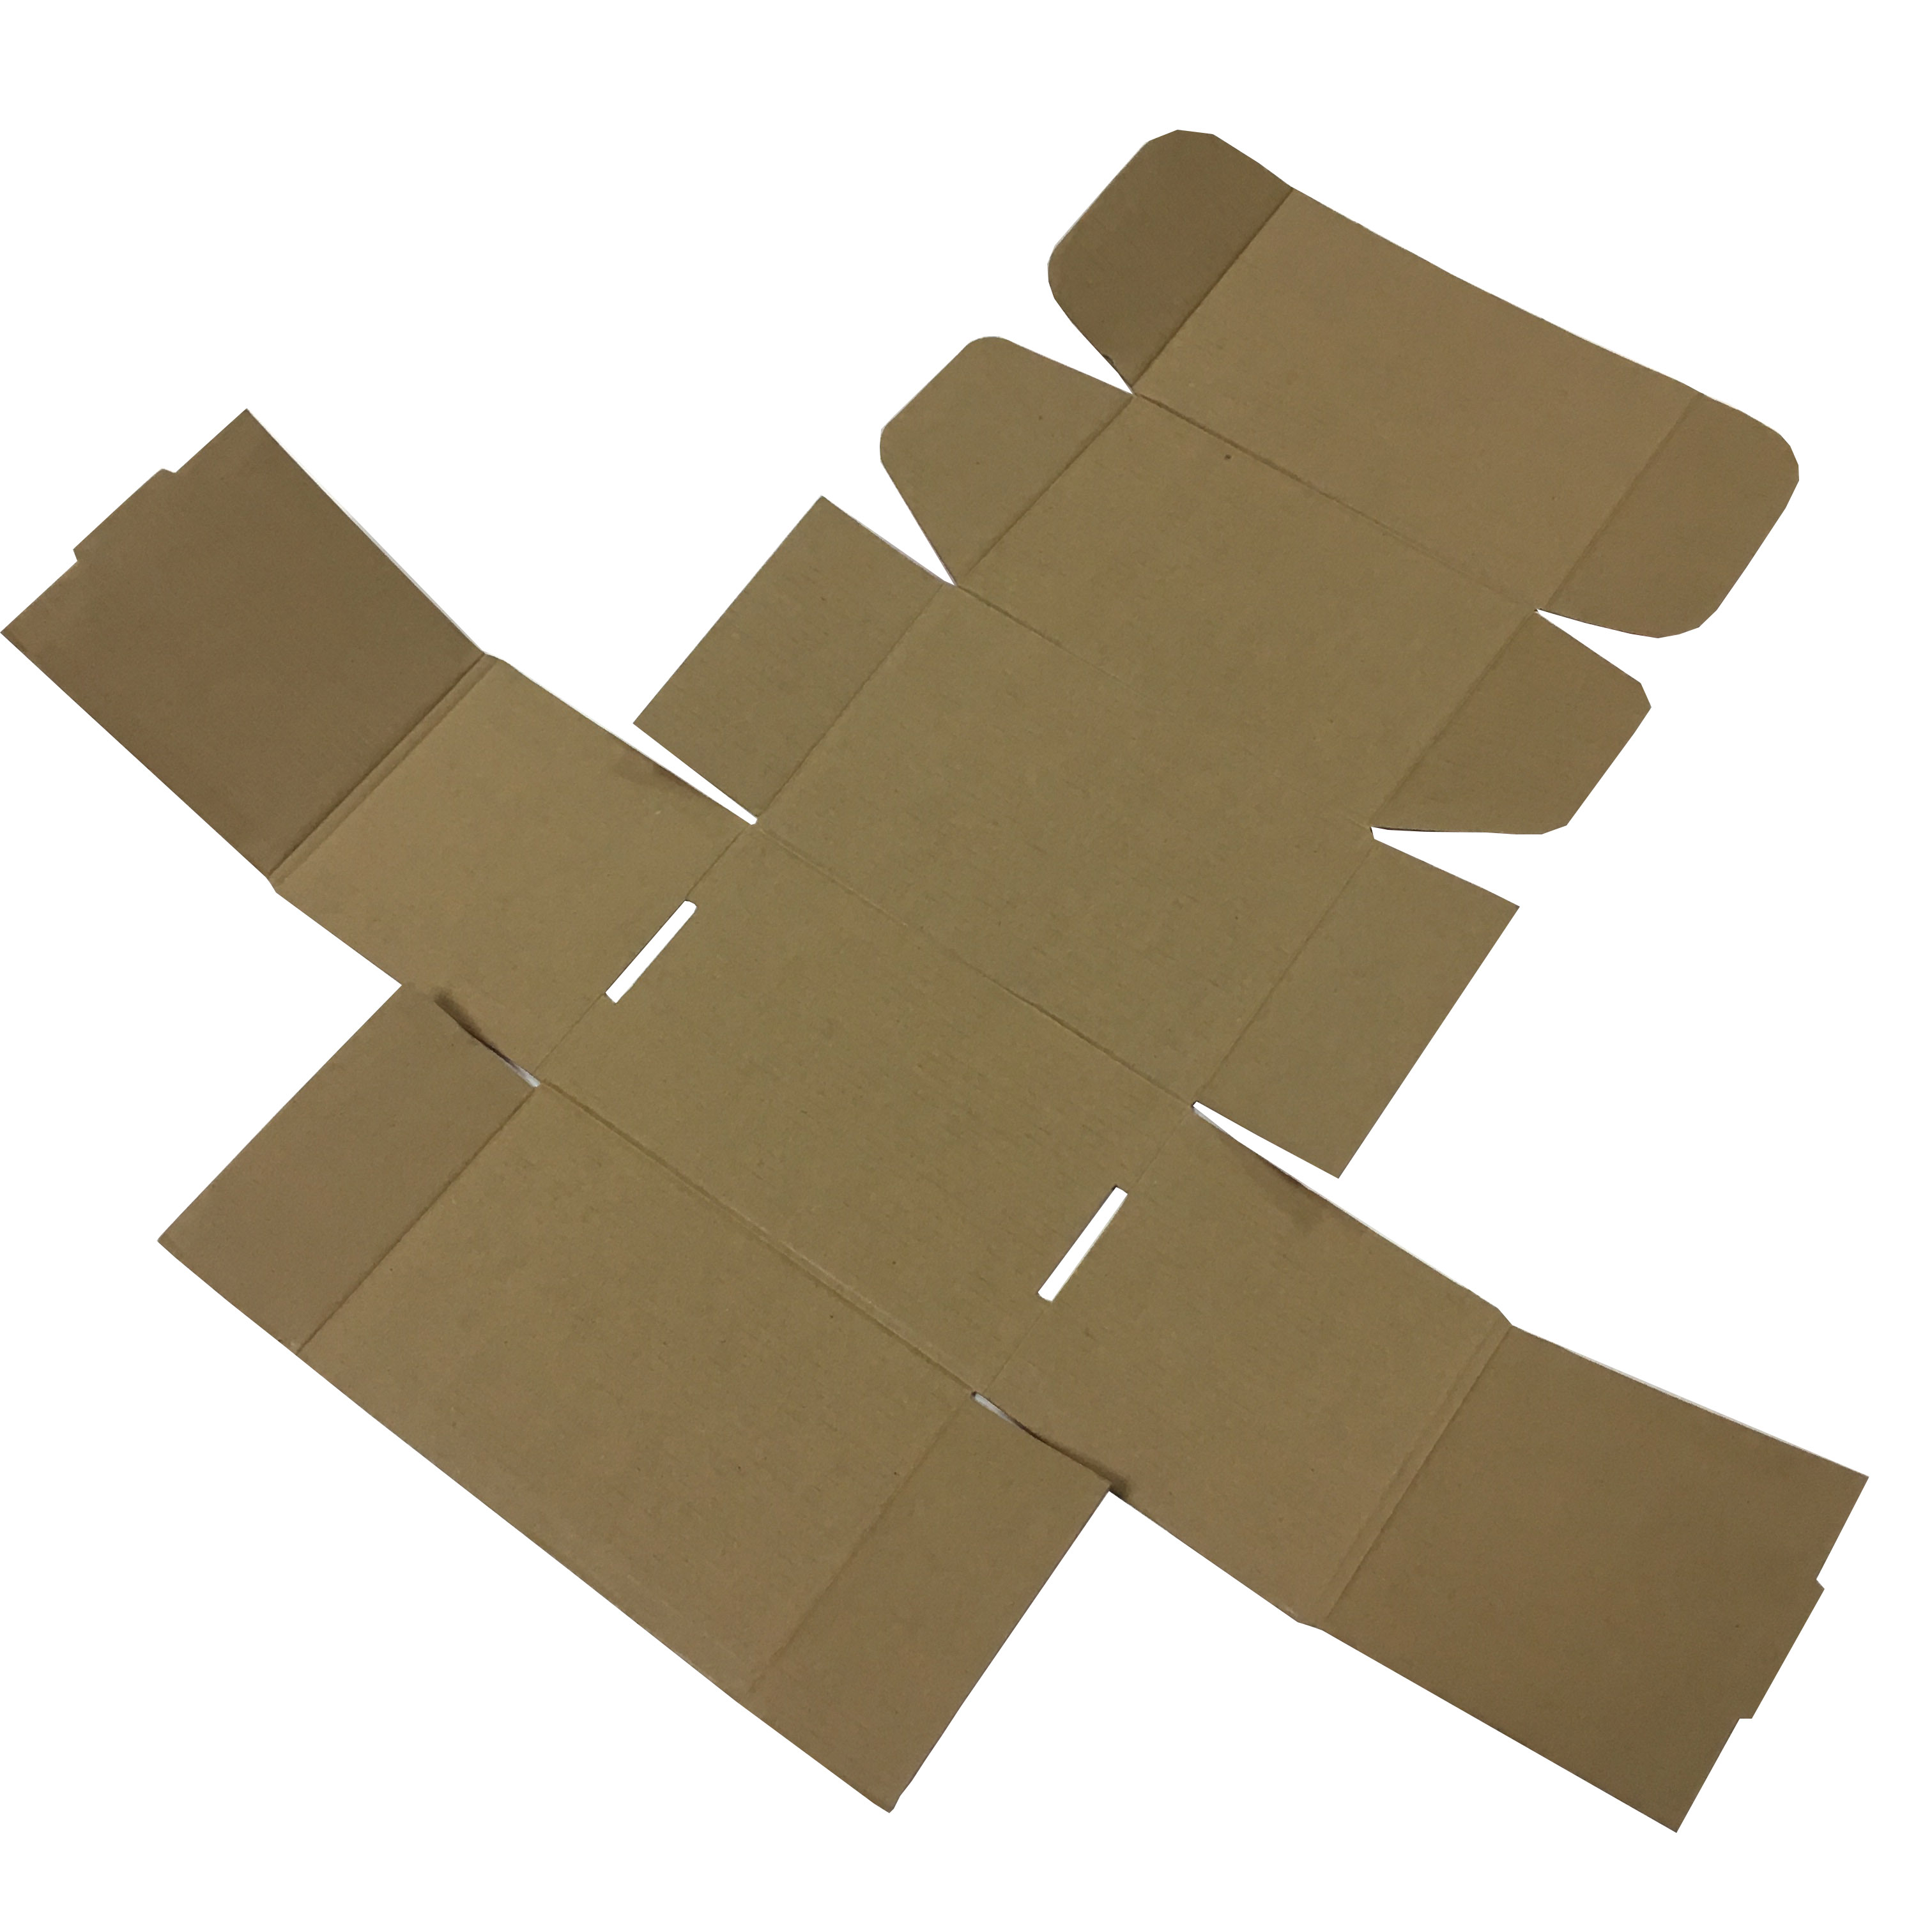 Undergarment Packaging Boxes